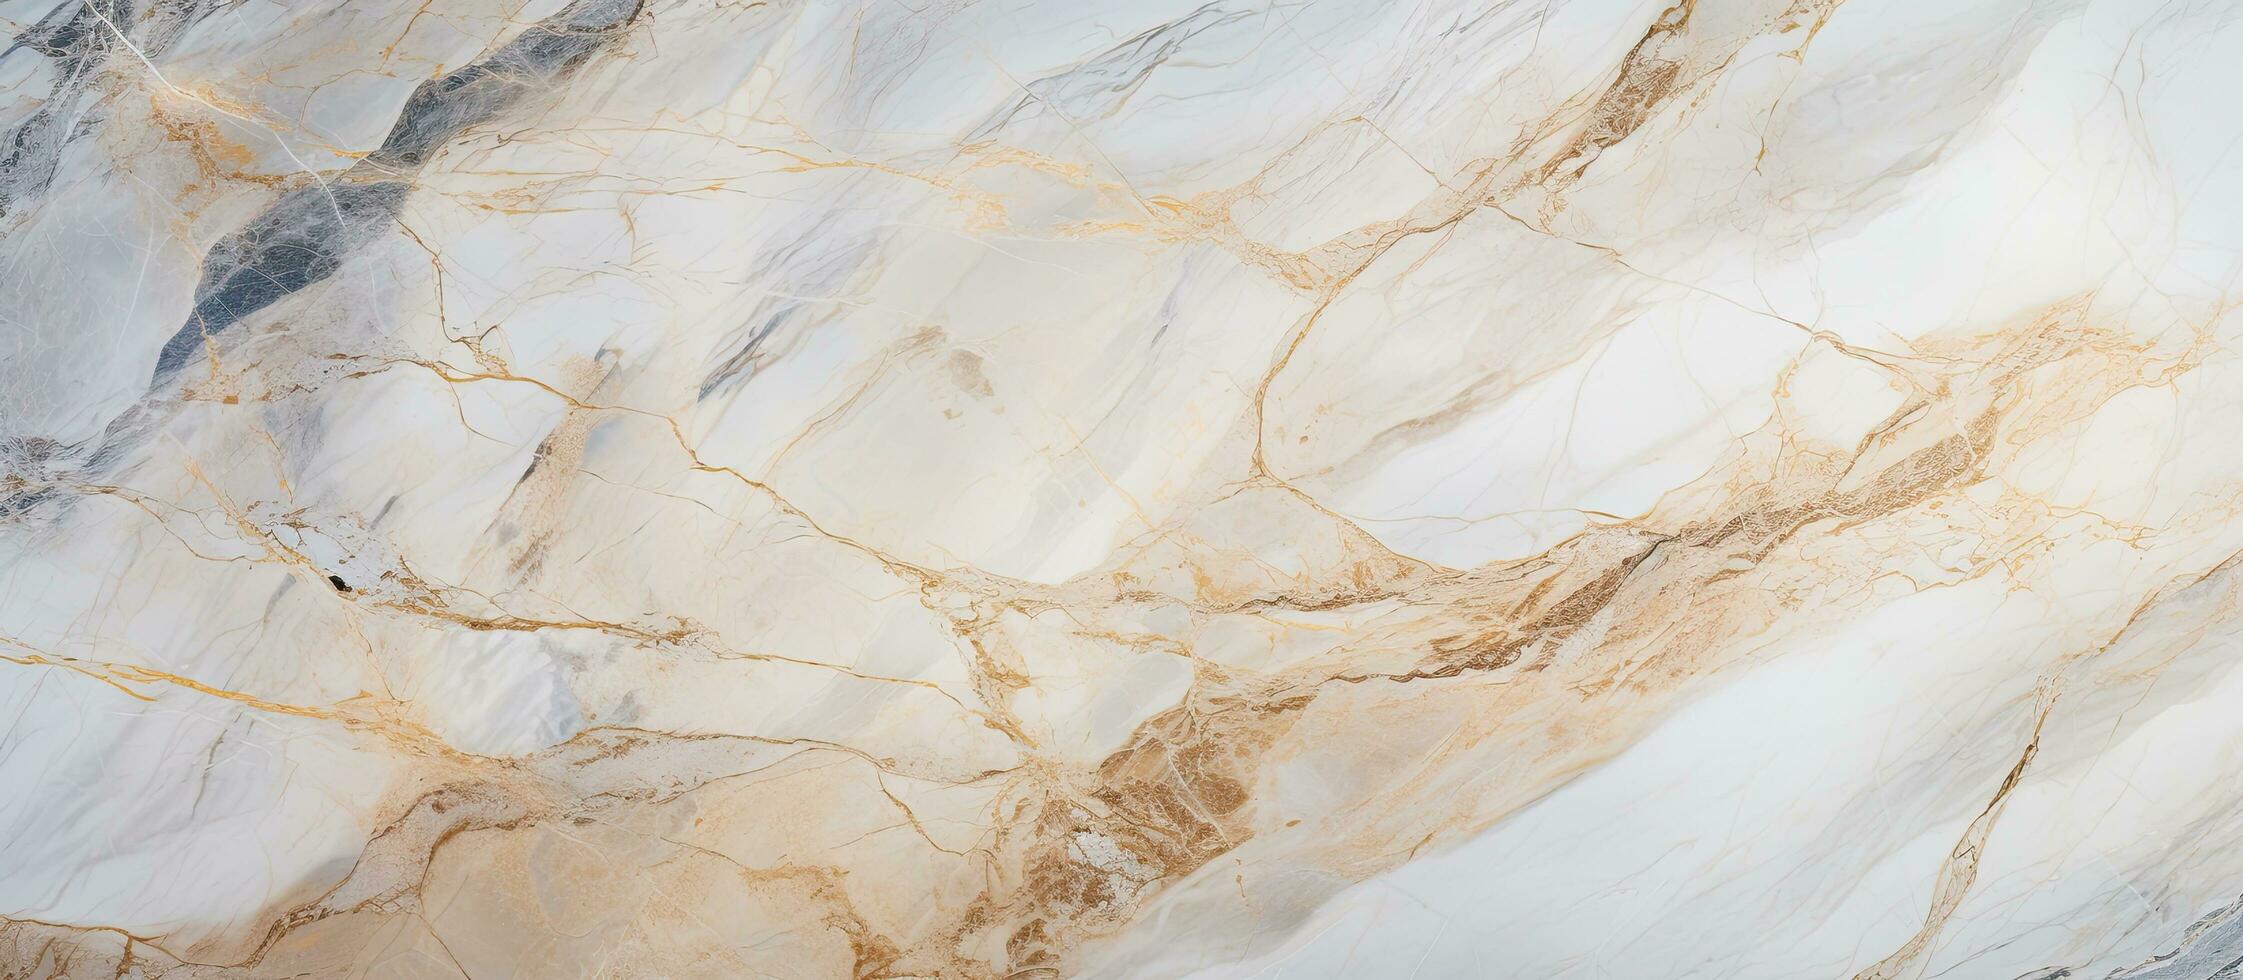 A close-up image of a polished marble surface, resembling a luxurious wallpaper, with blank photo